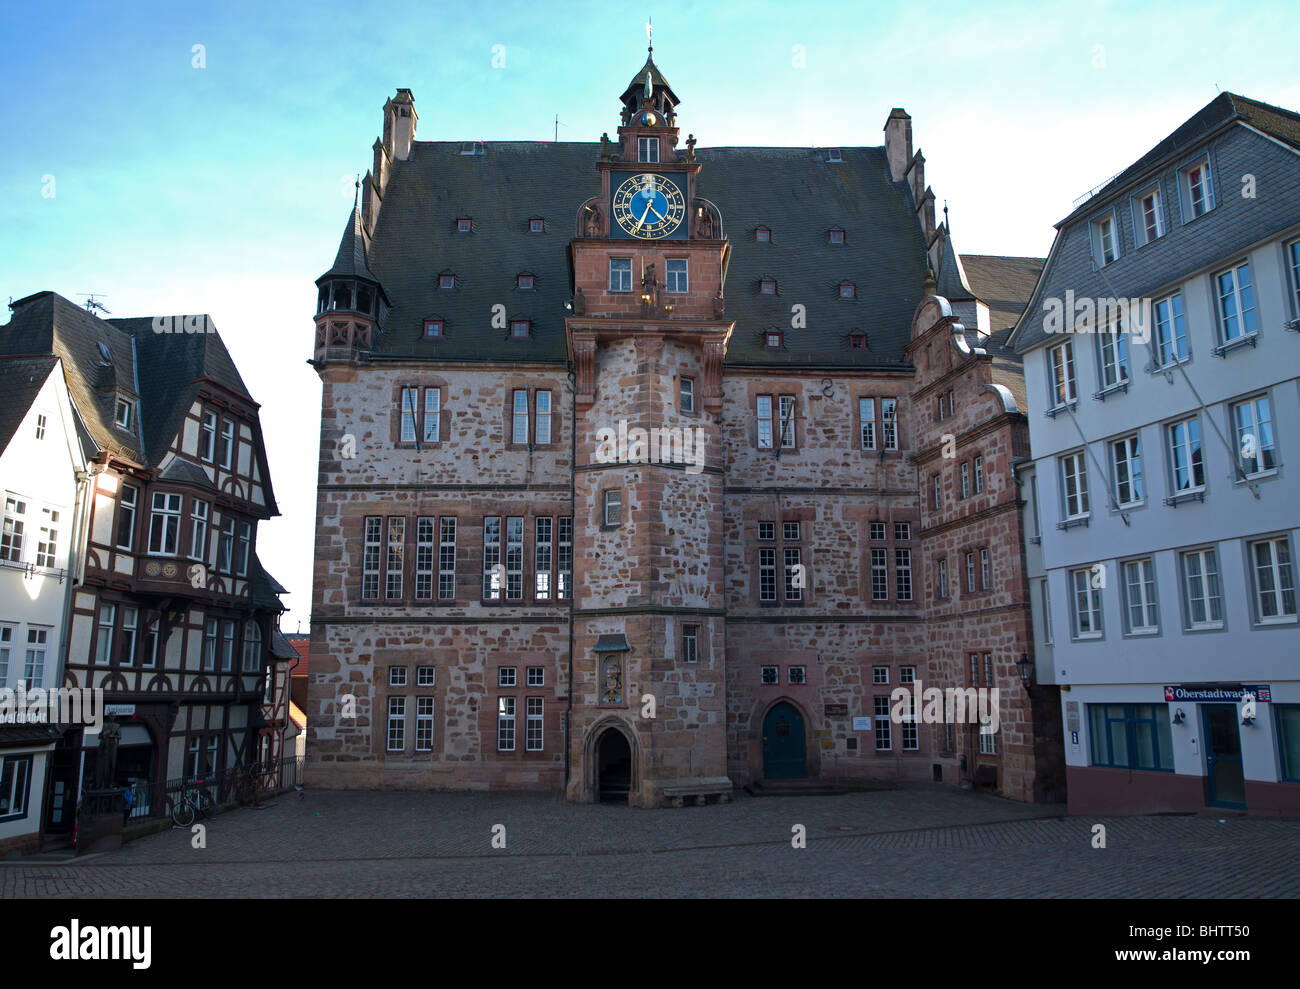 Townhall of Marburg, Hesse, Germany with market place and half-timbered houses pictured on 27th February 2010. Stock Photo